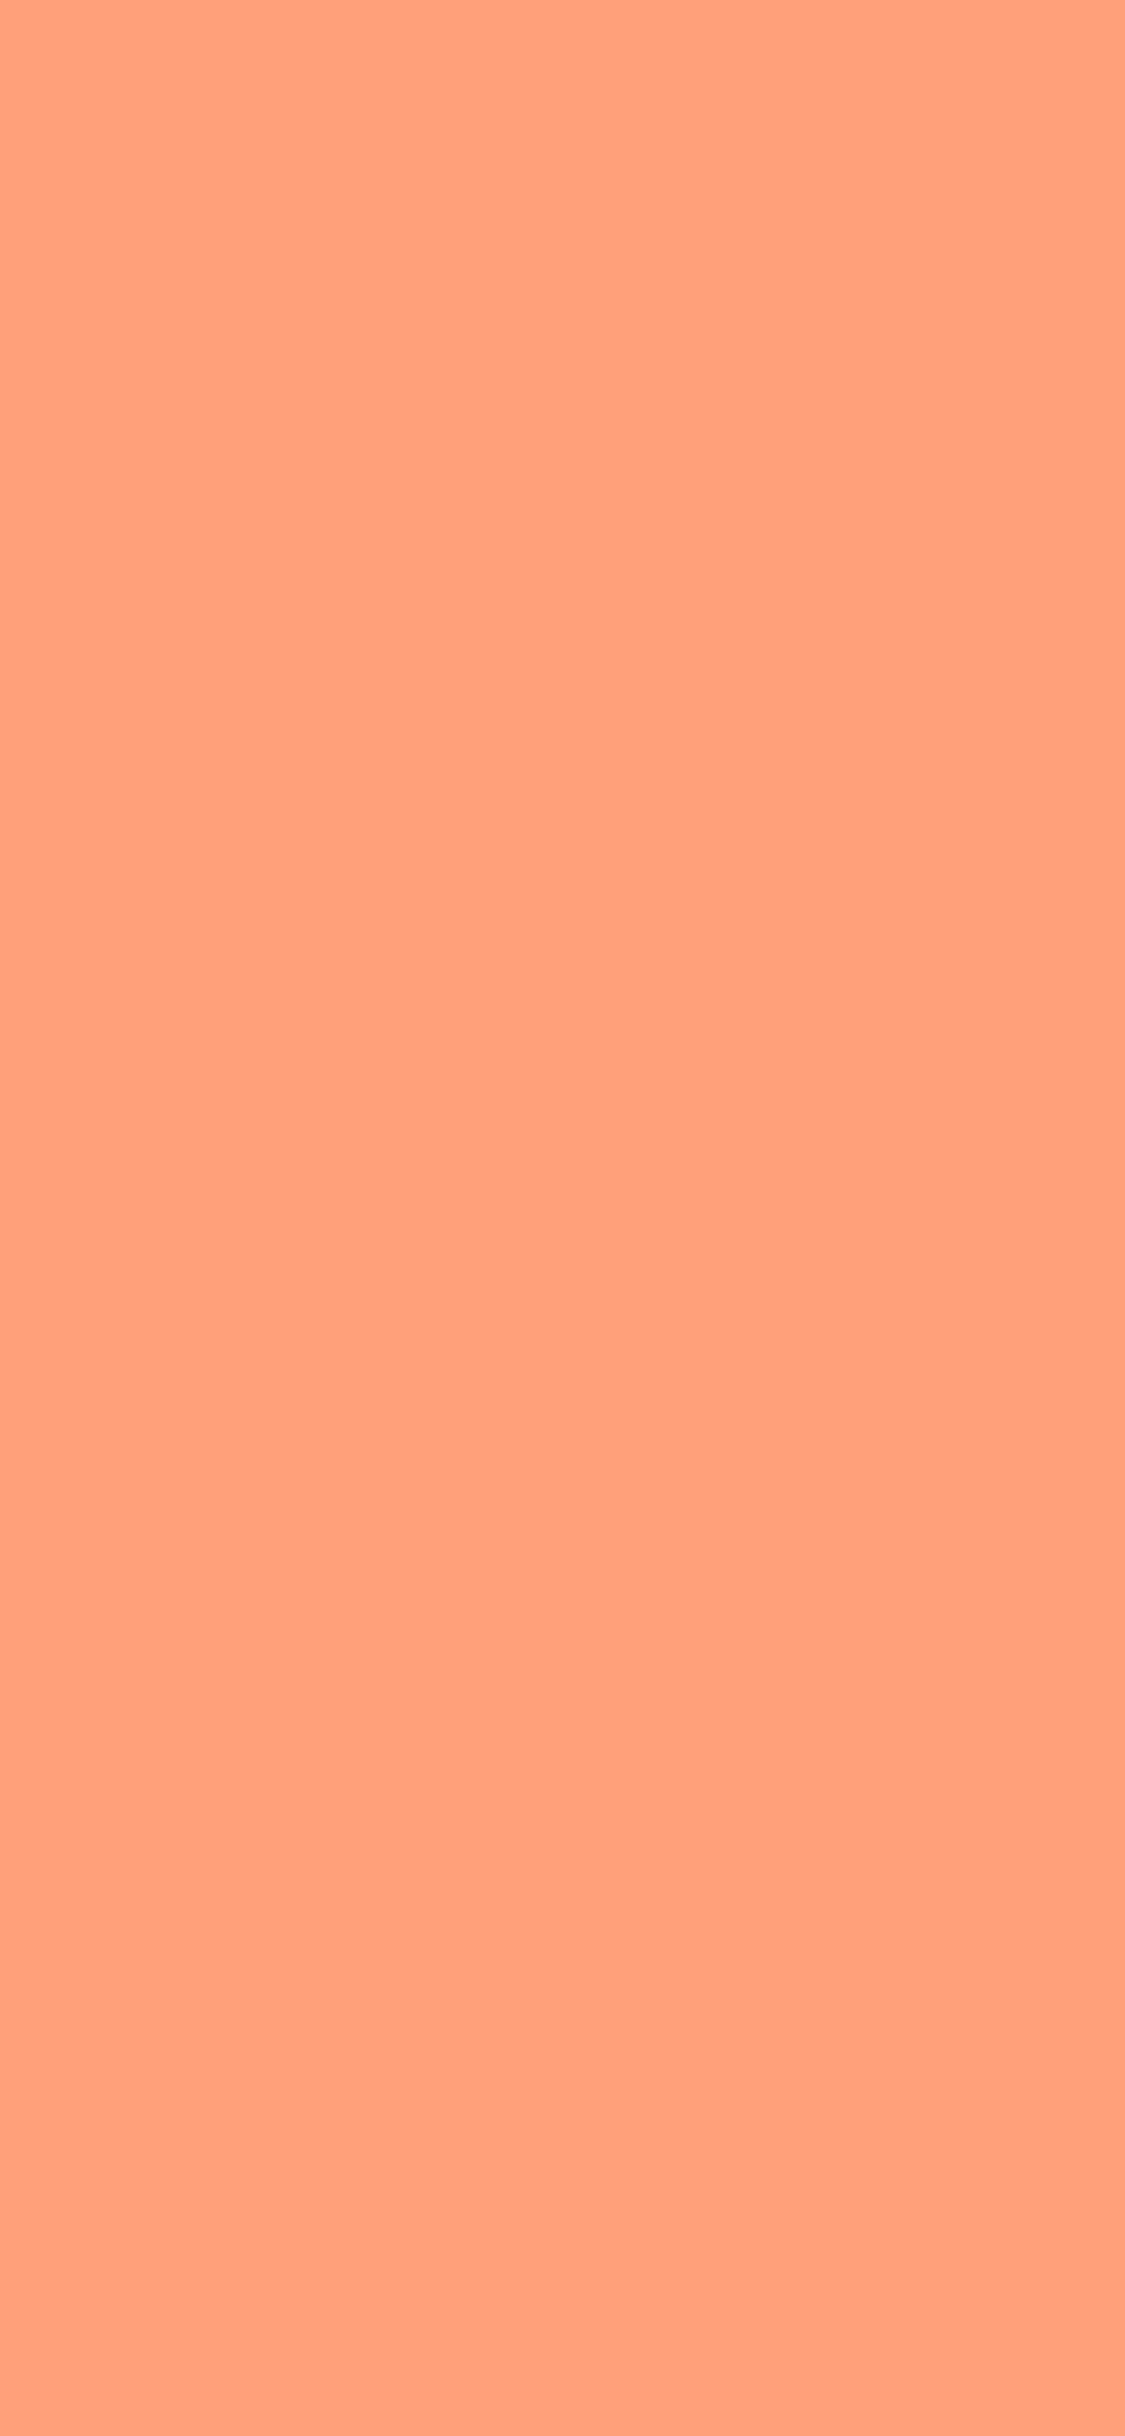 1125x2436 Light Salmon Solid Color Background